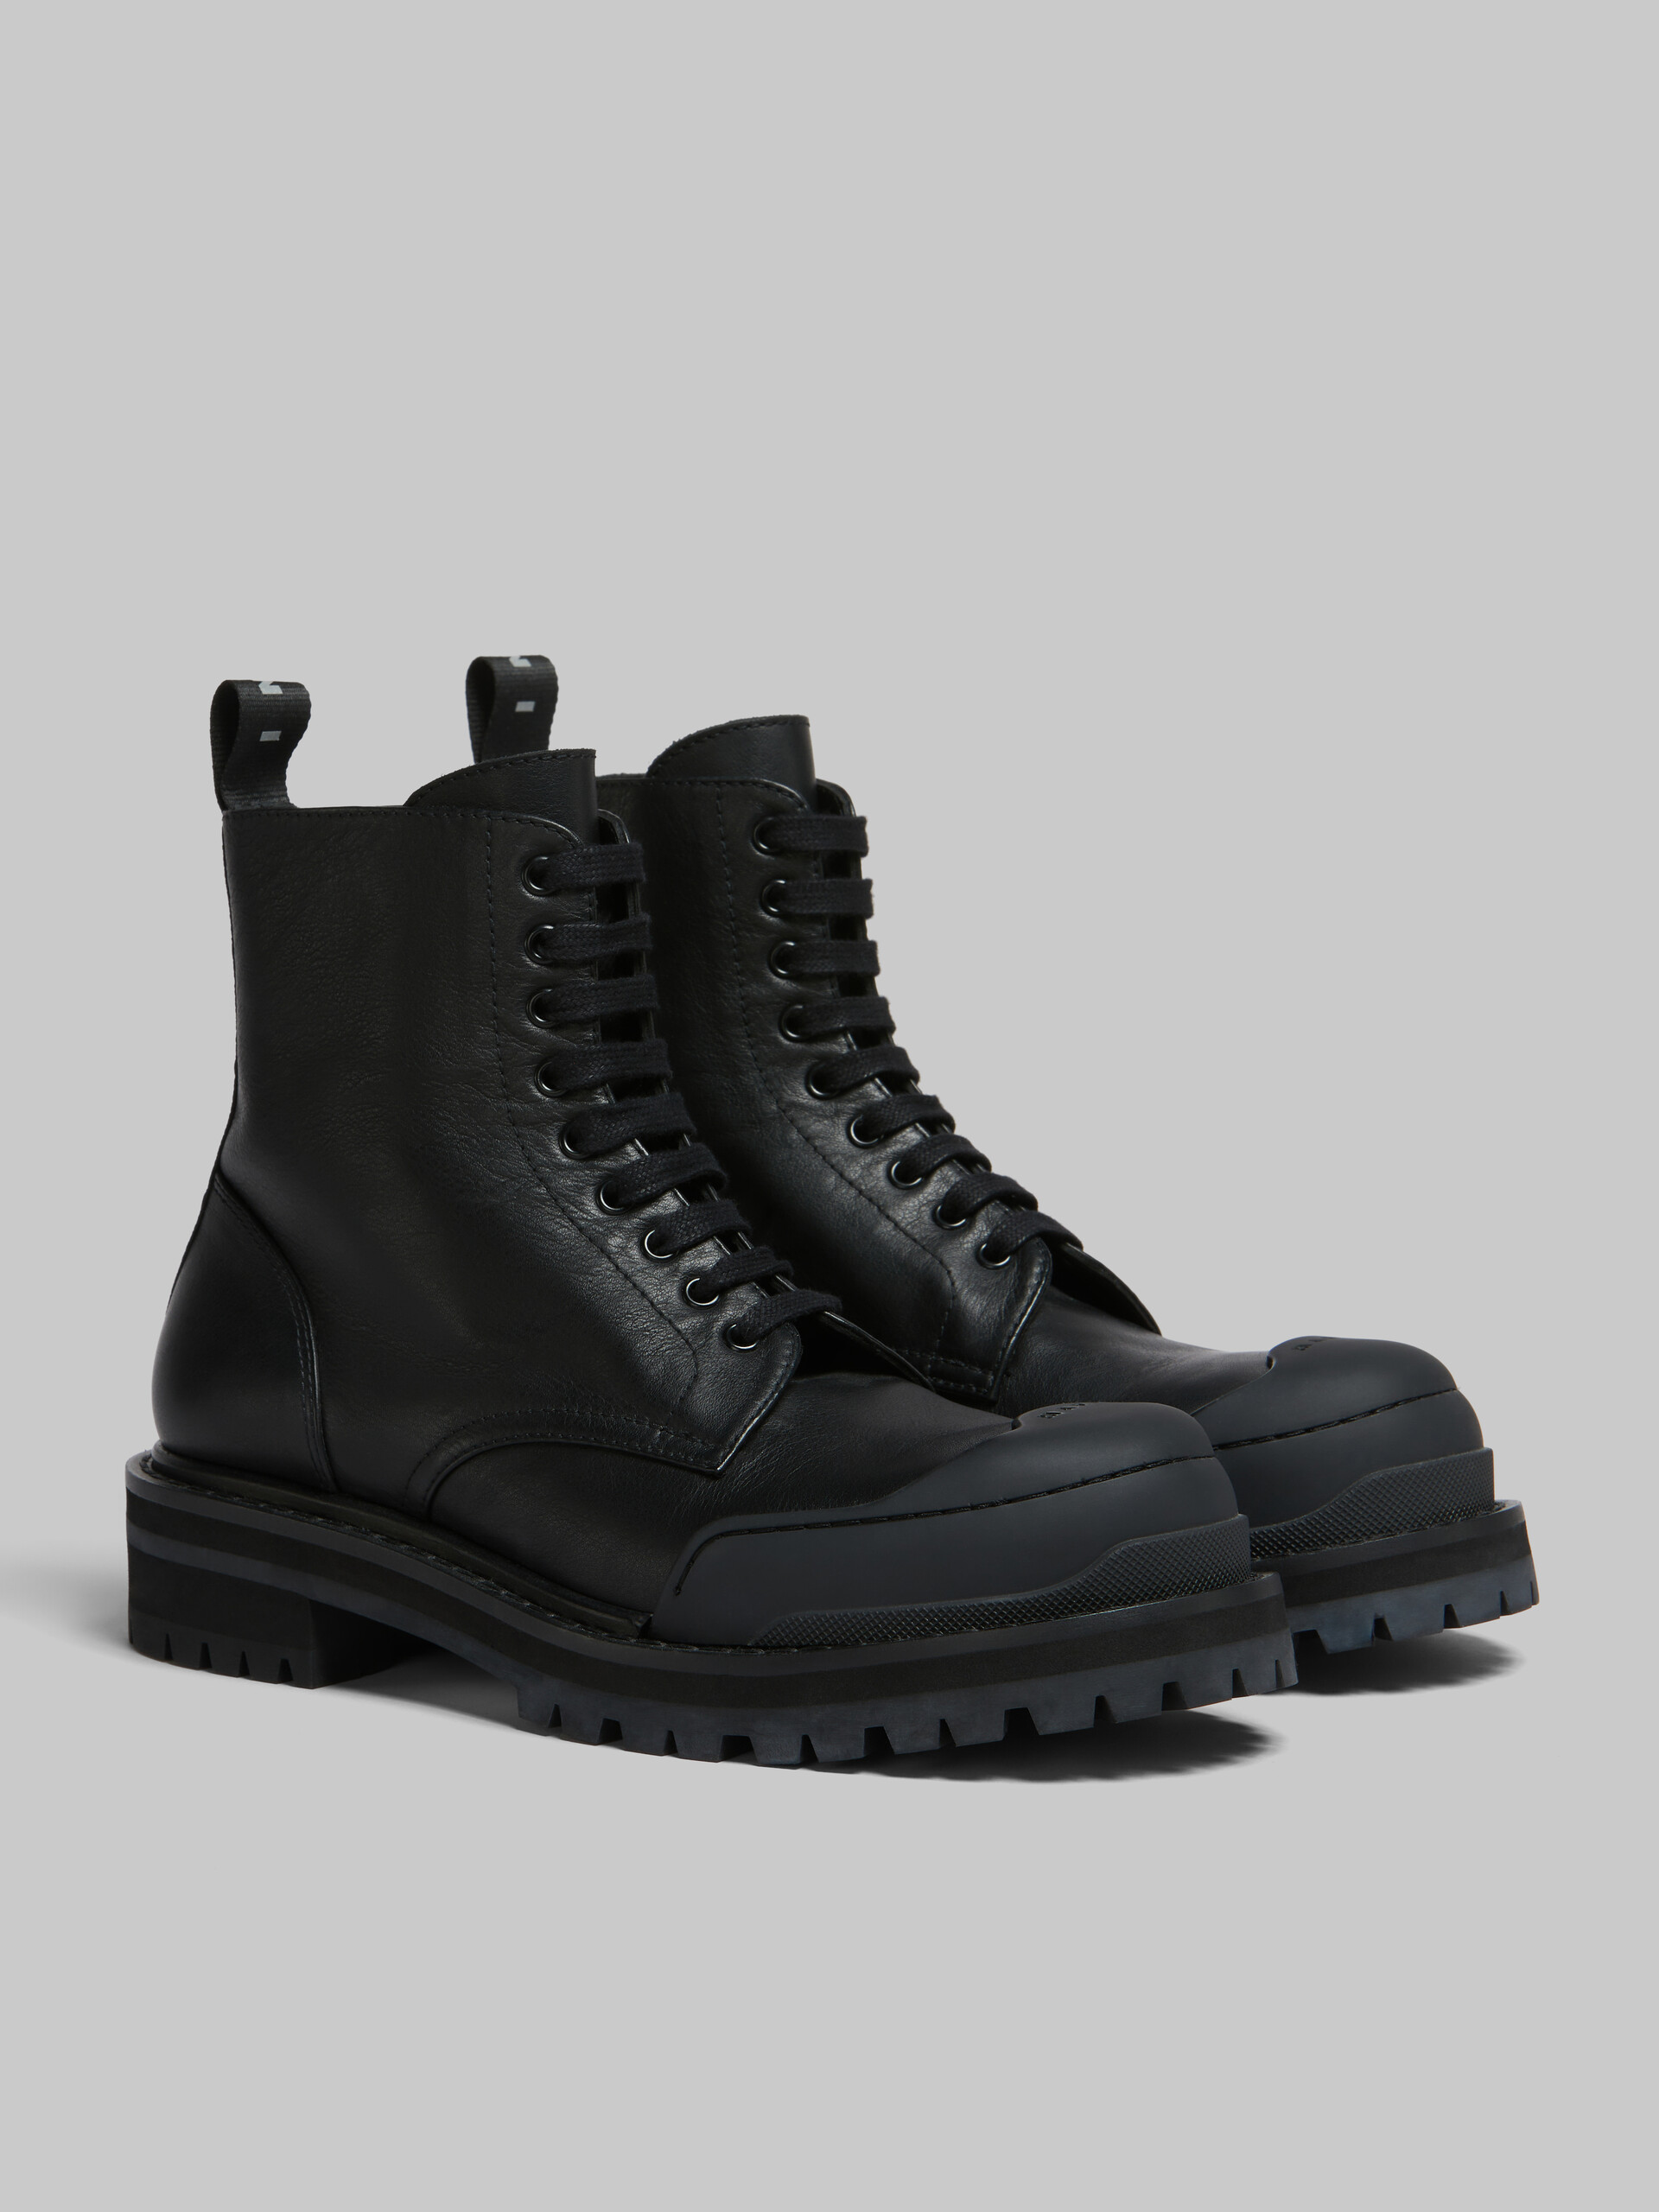 Black leather Dada Army combat boot - Boots - Image 2